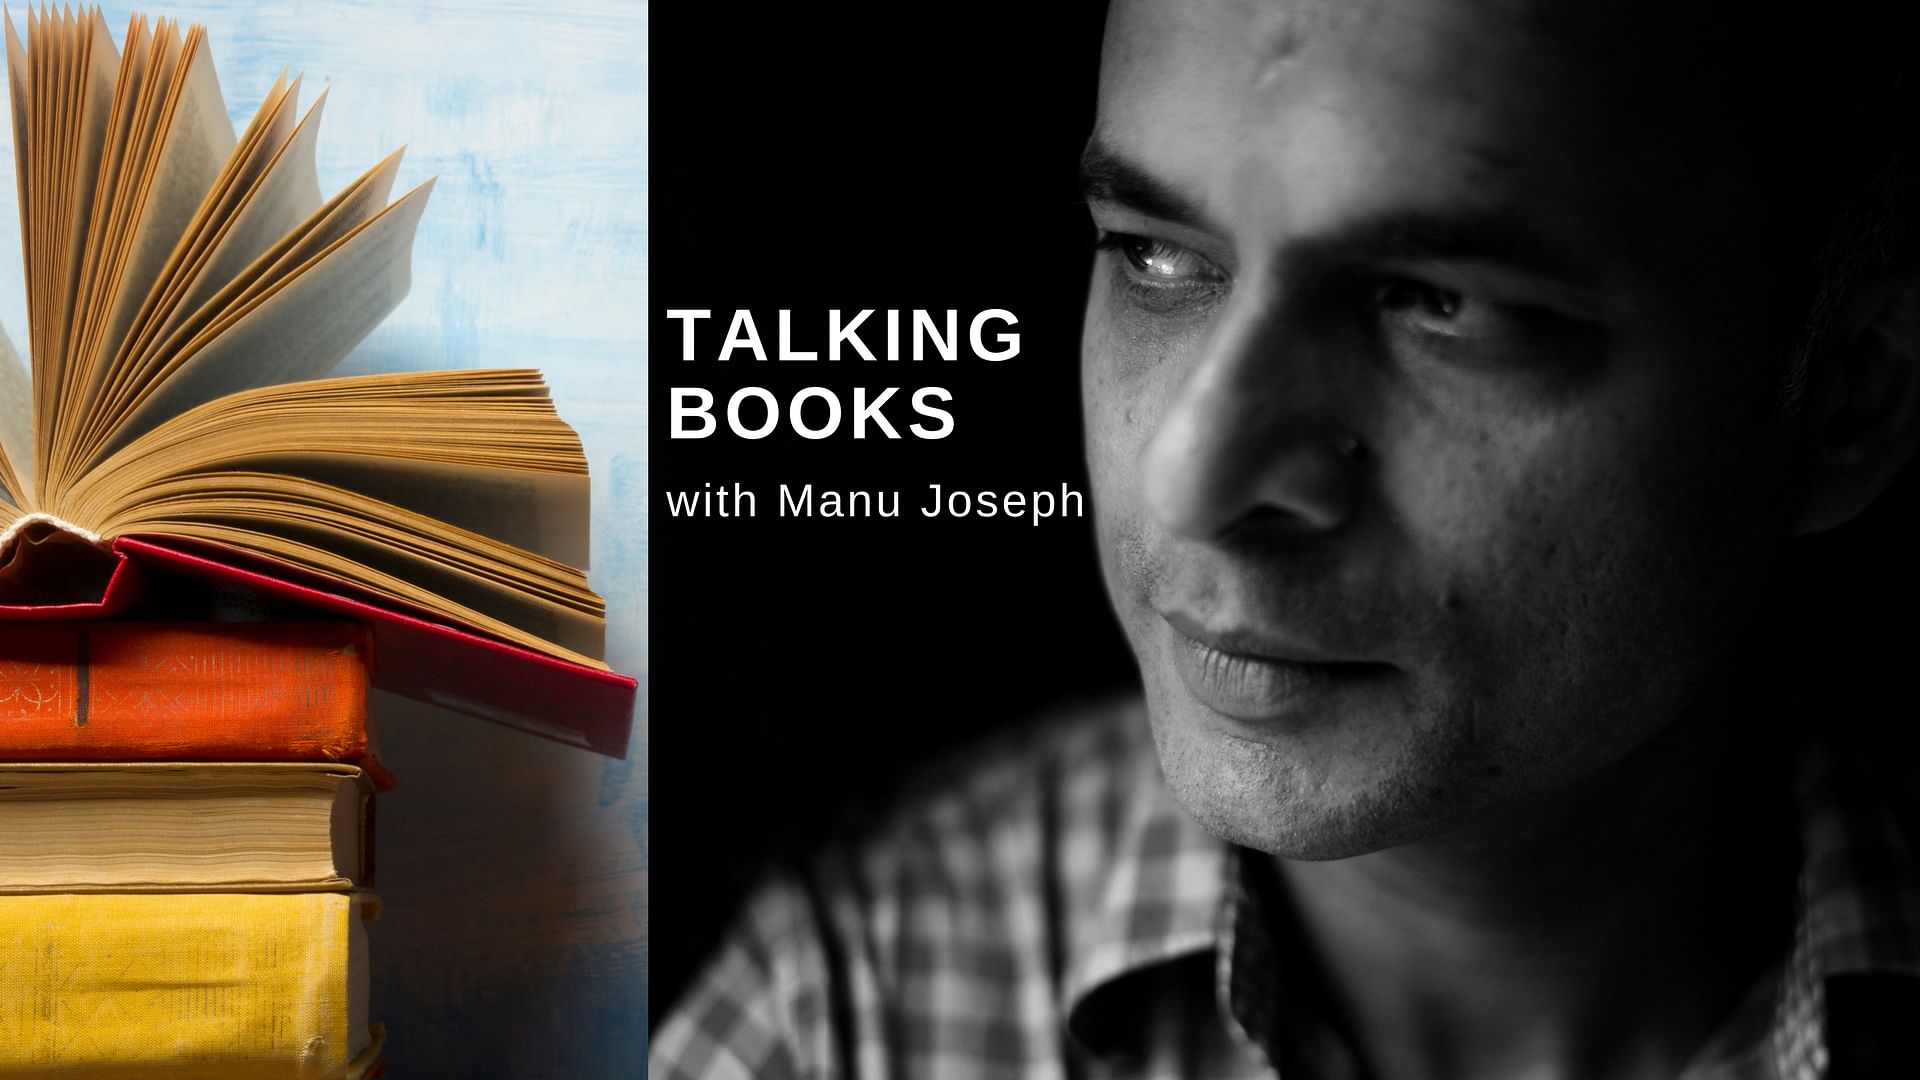 Manu Joseph on books, authors and everything in between.